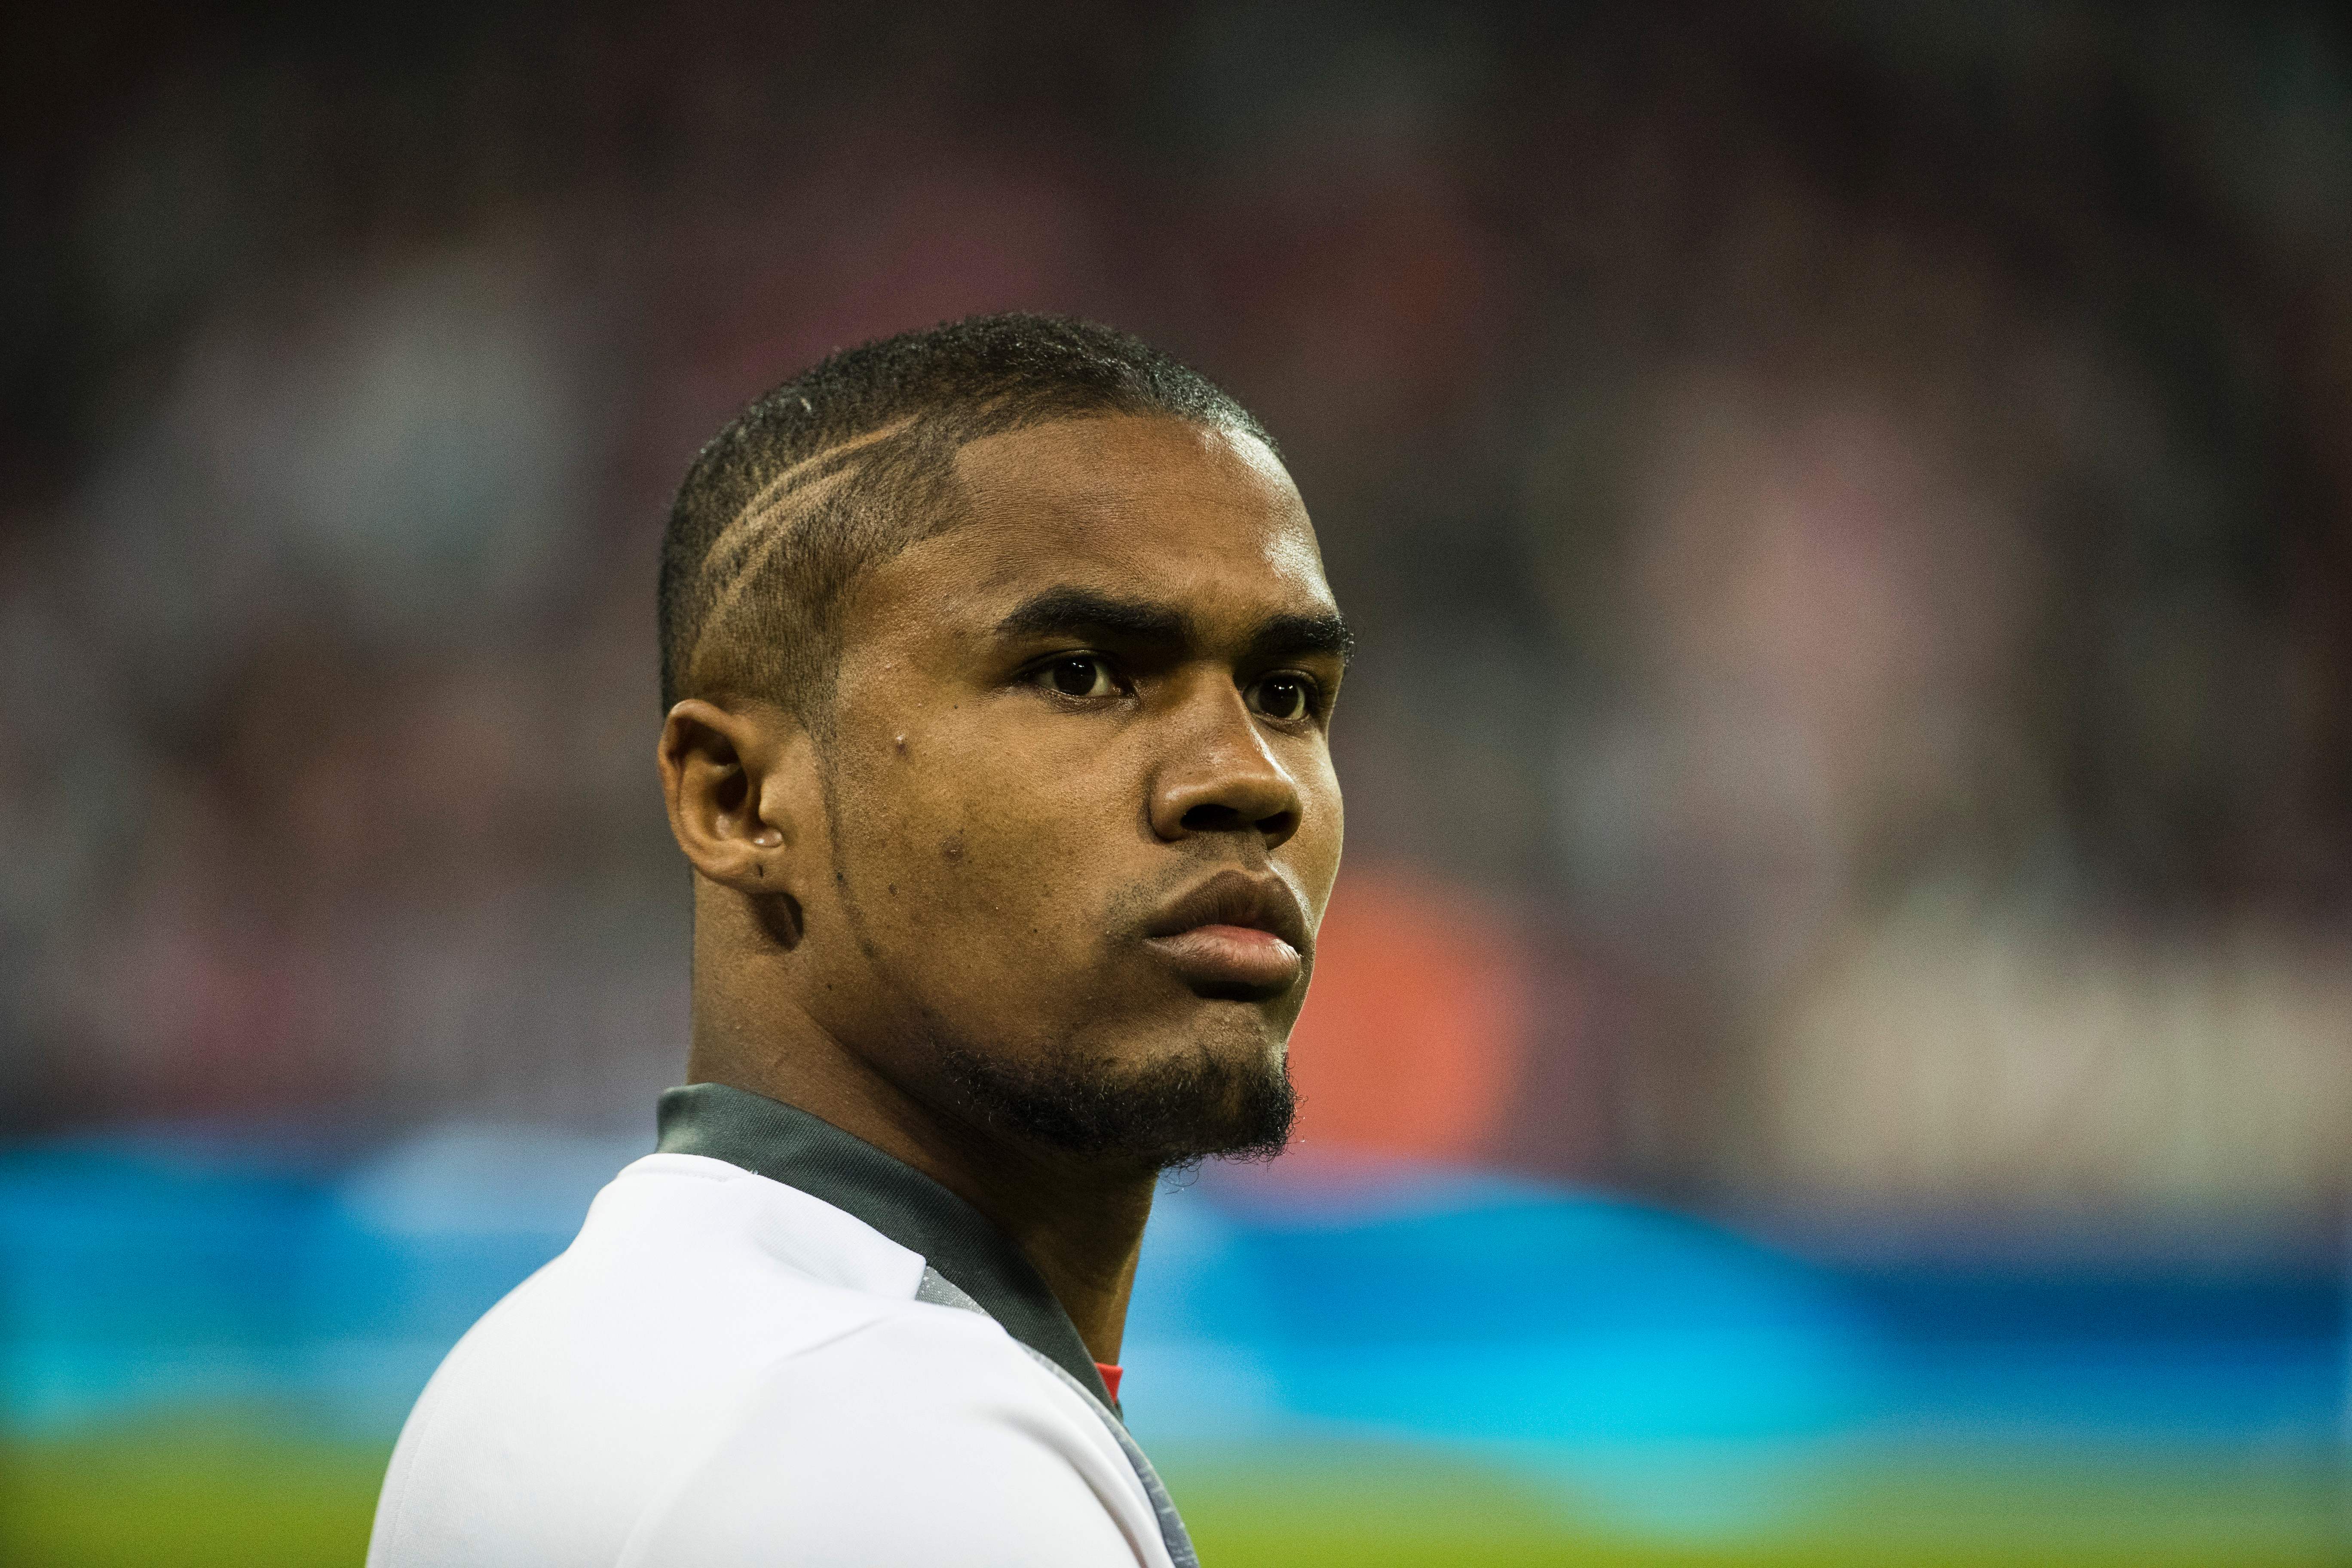 Bayern Munich's Brazilian forward Douglas Costa is seen during warm up prior to the UEFA Champions League 1st leg quarter-final football match FC Bayern Munich v Real Madrid in Munich, southen Germany on April 12, 2017. / AFP PHOTO / Odd ANDERSEN        (Photo credit should read ODD ANDERSEN/AFP/Getty Images)